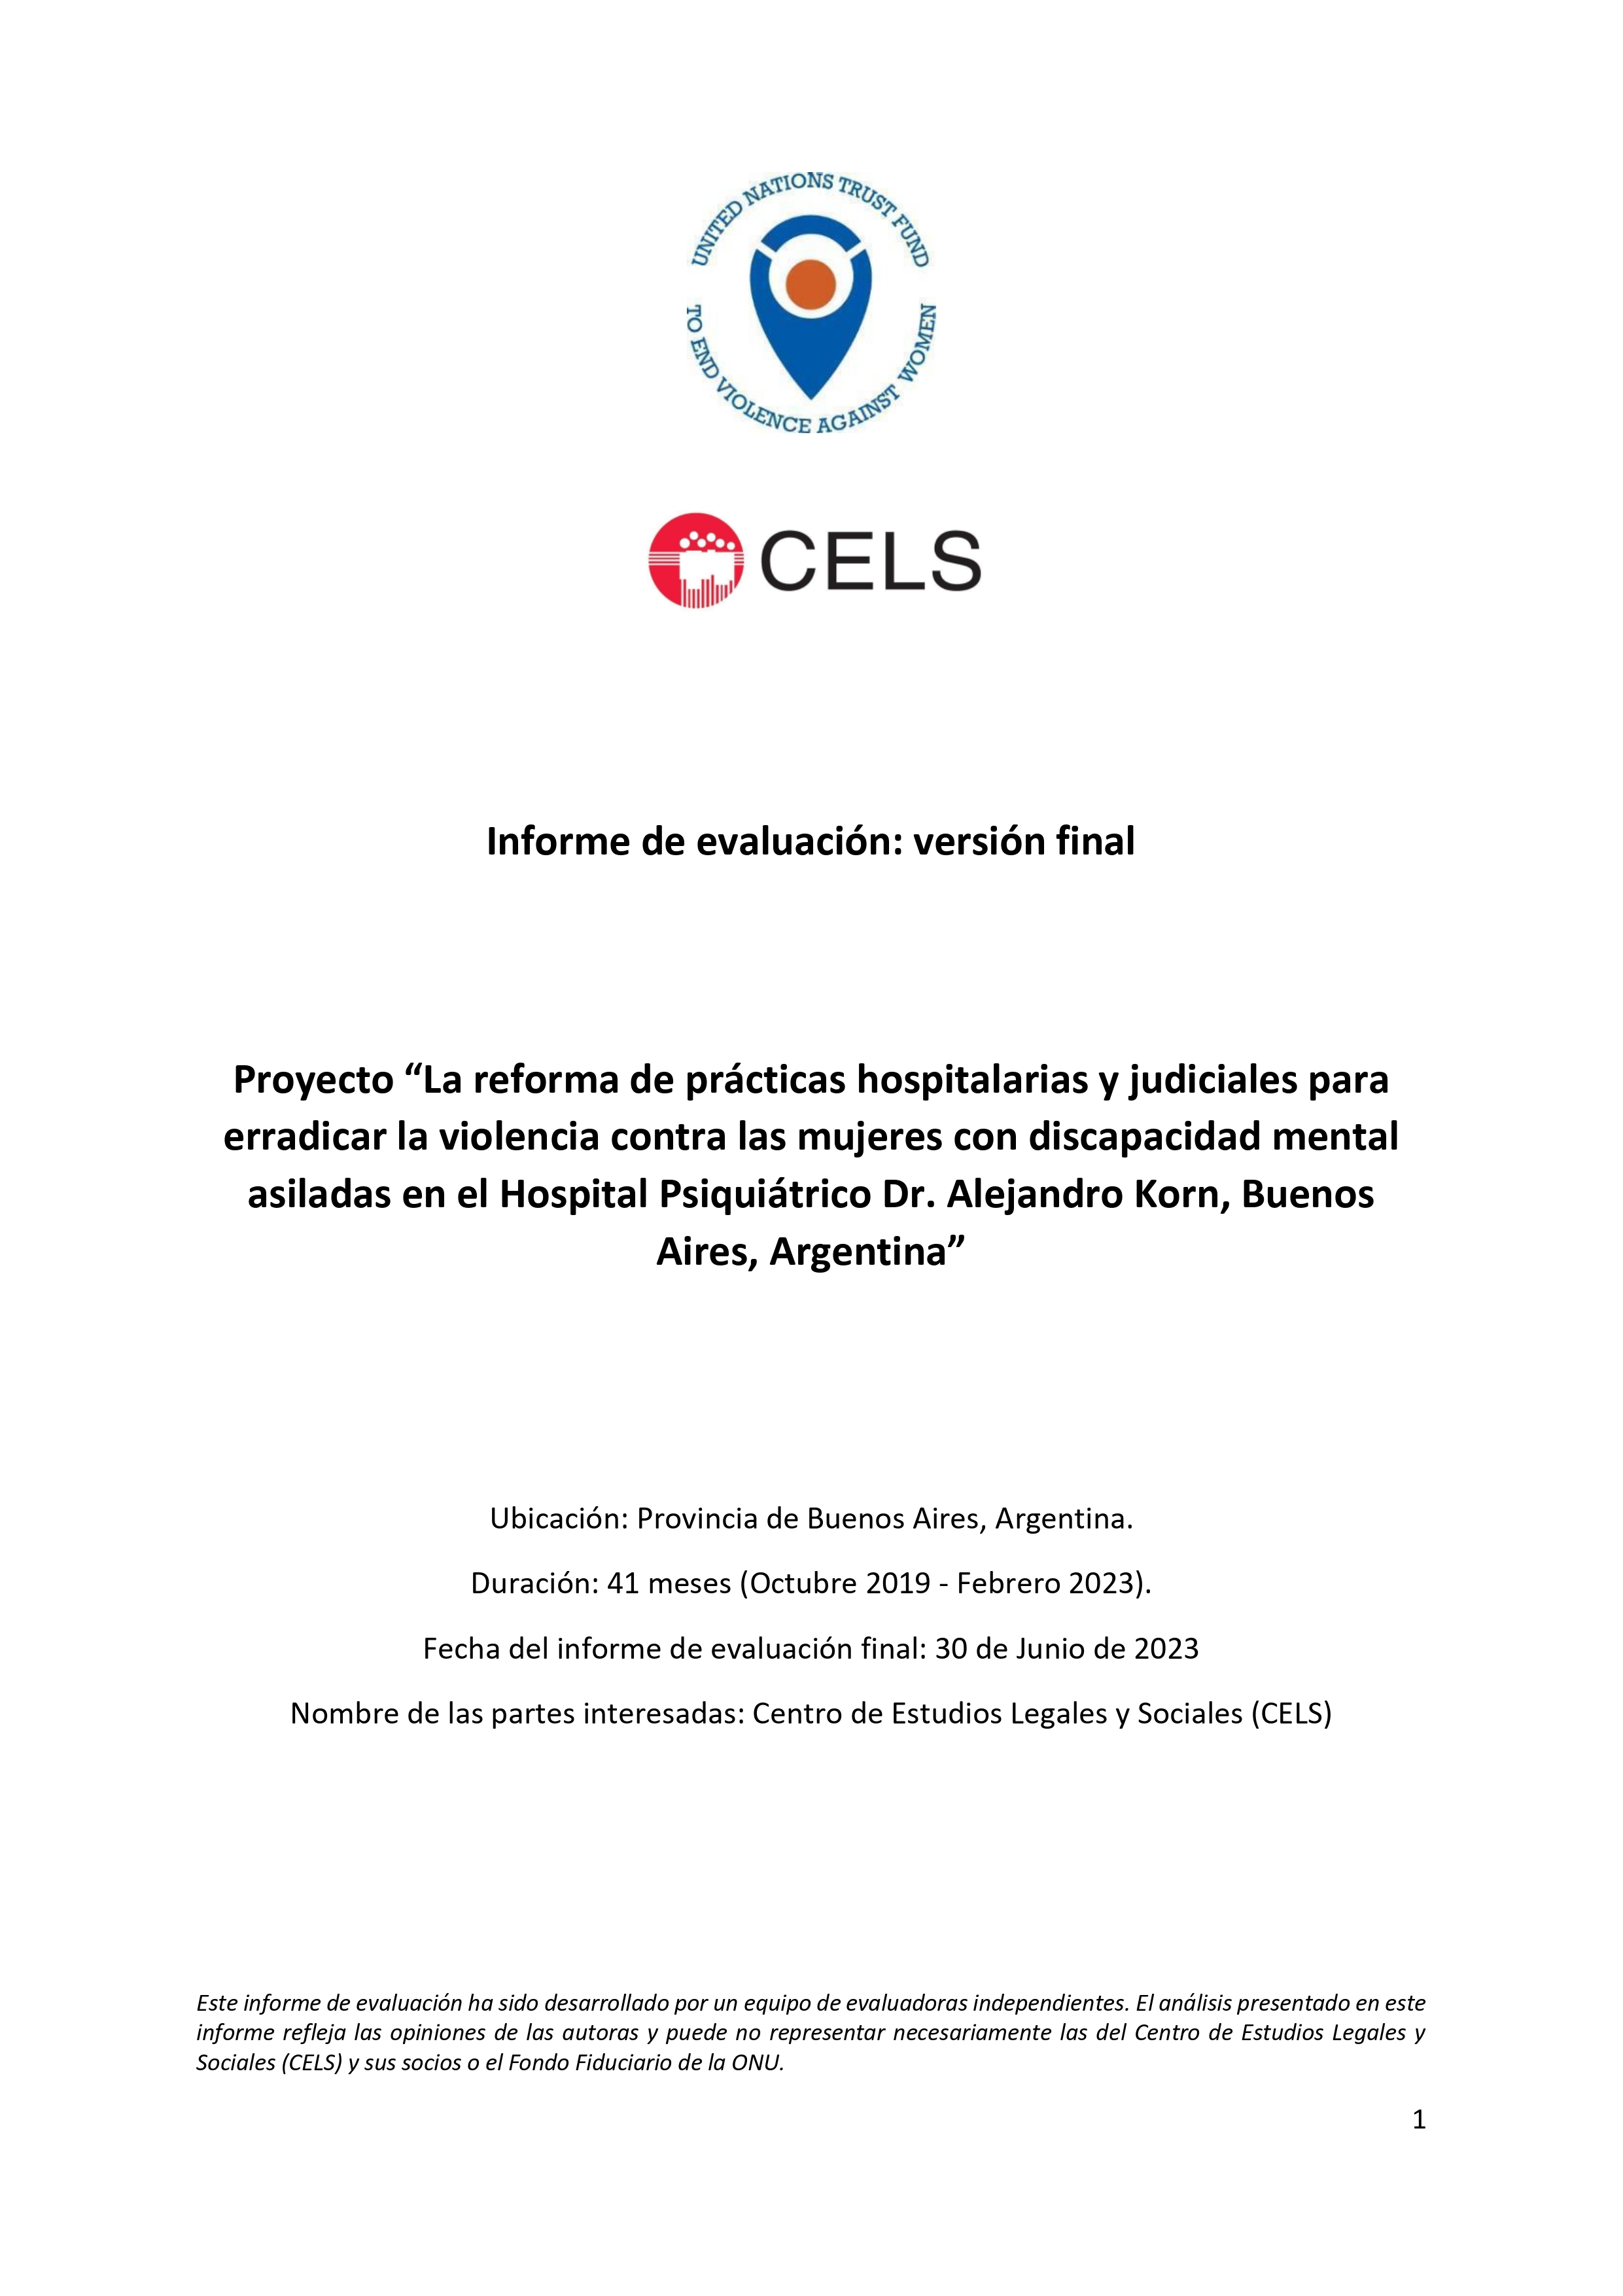 Final Evaluation: The reform of hospital and legal practices to eradicate violence against women with mental disabilities isolated at the Dr. Alejandro Korn Psychiatric Hospital, Buenos Aires, Argentina